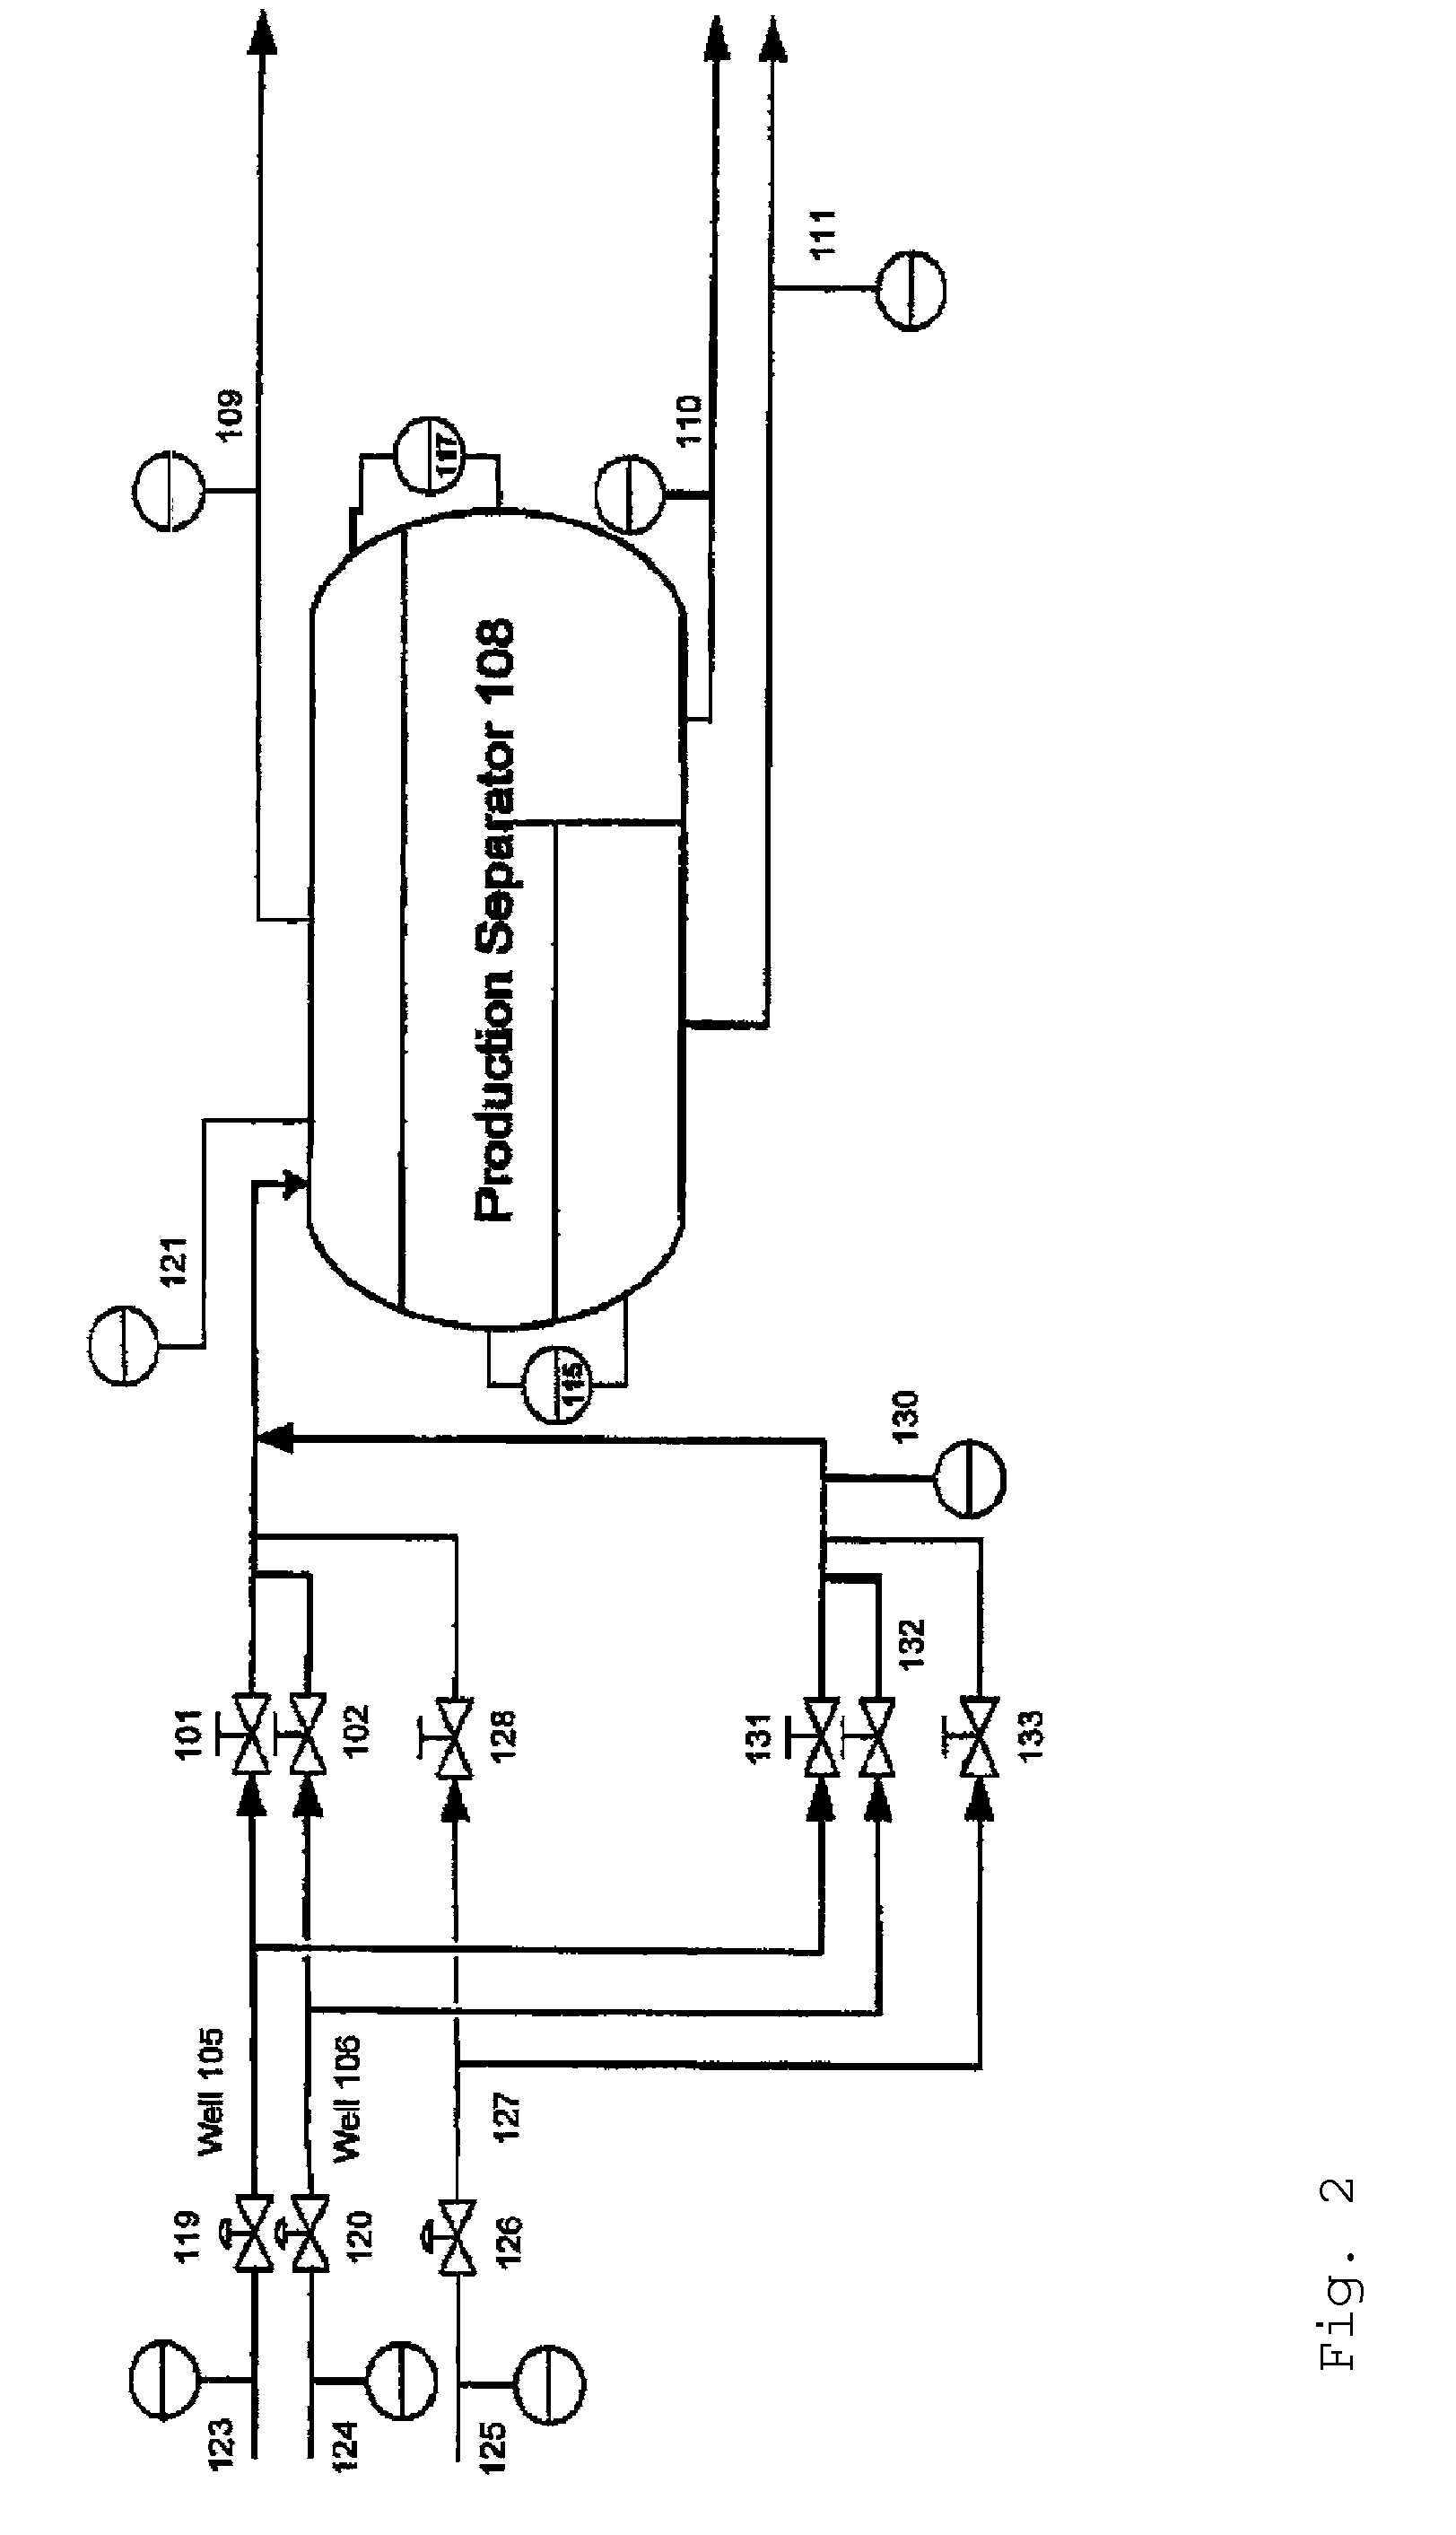 Method For Prediction In An Oil/Gas Production System